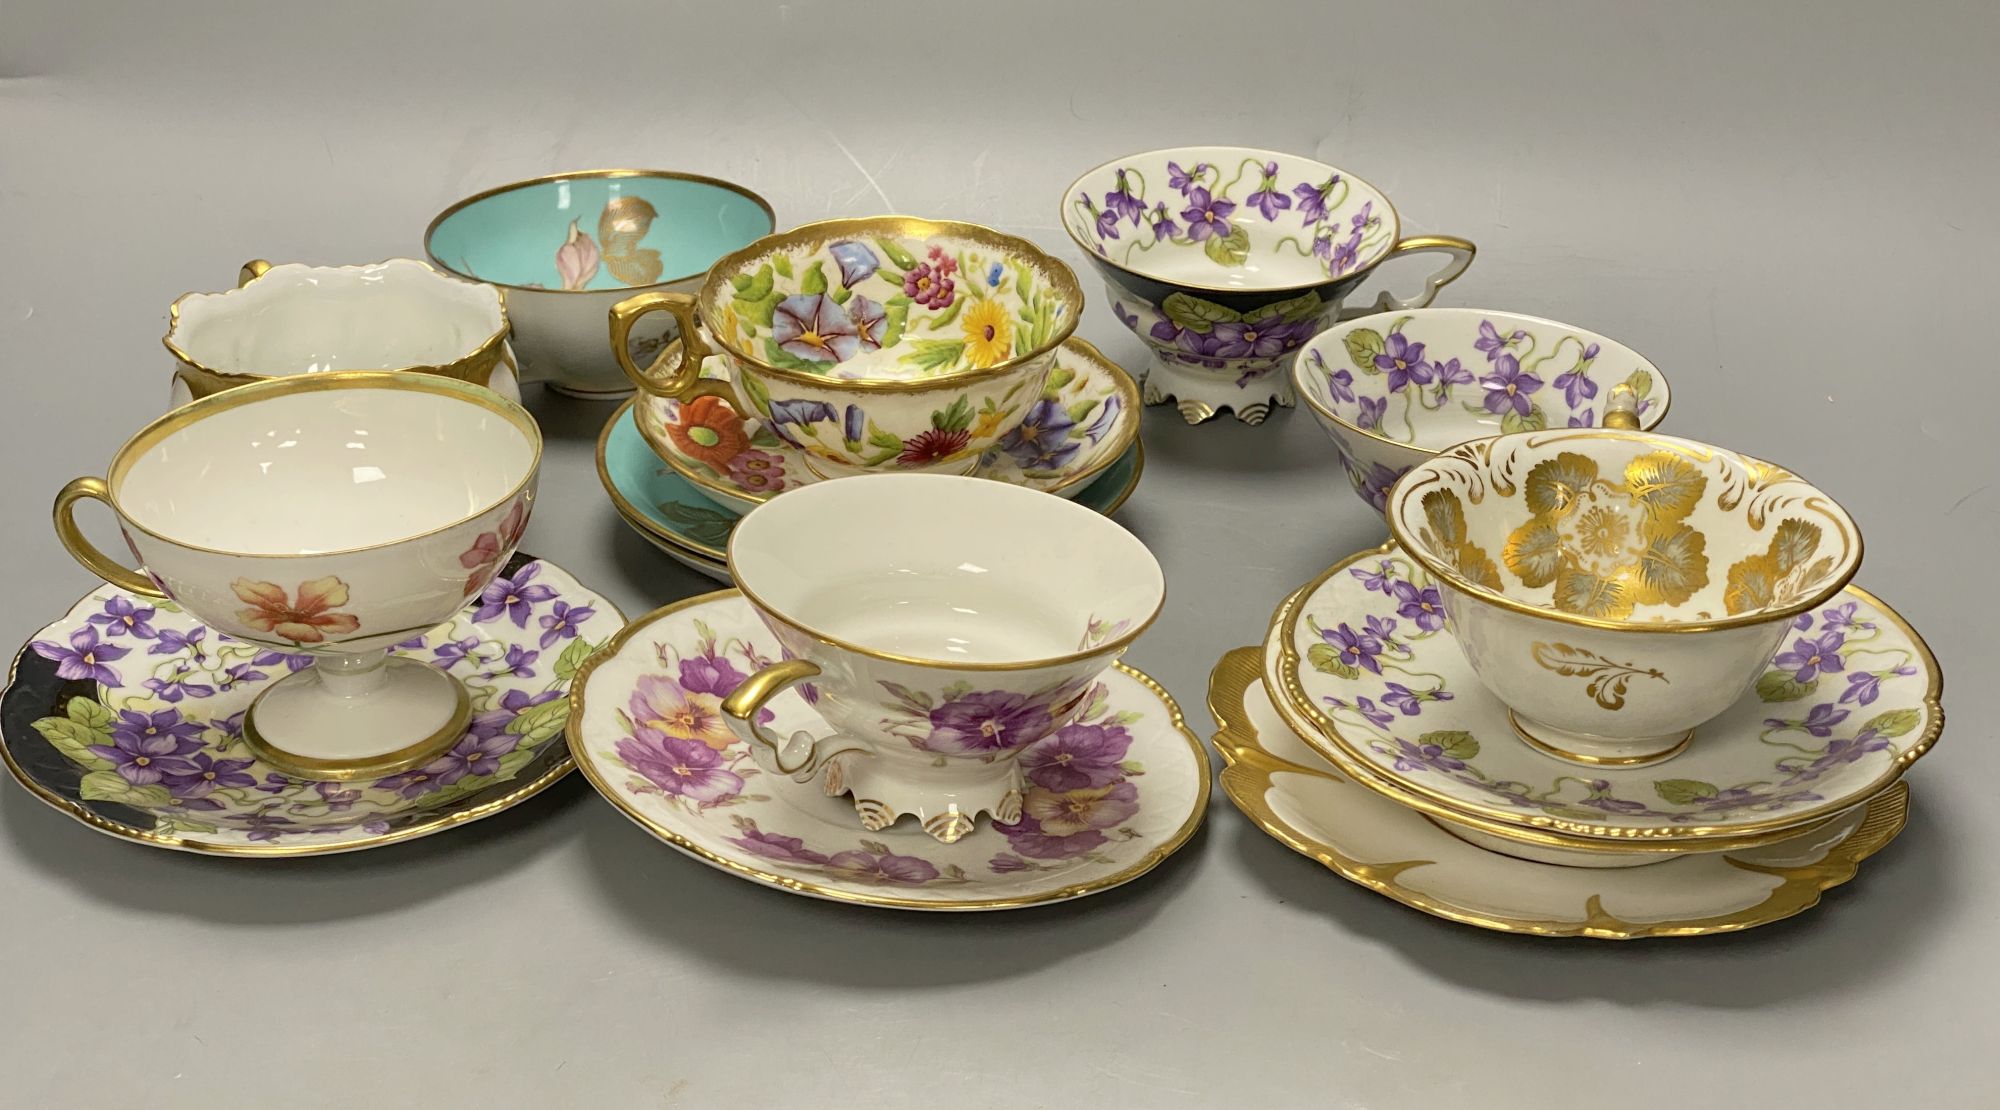 A collection of Continental porcelain tea cups and saucers